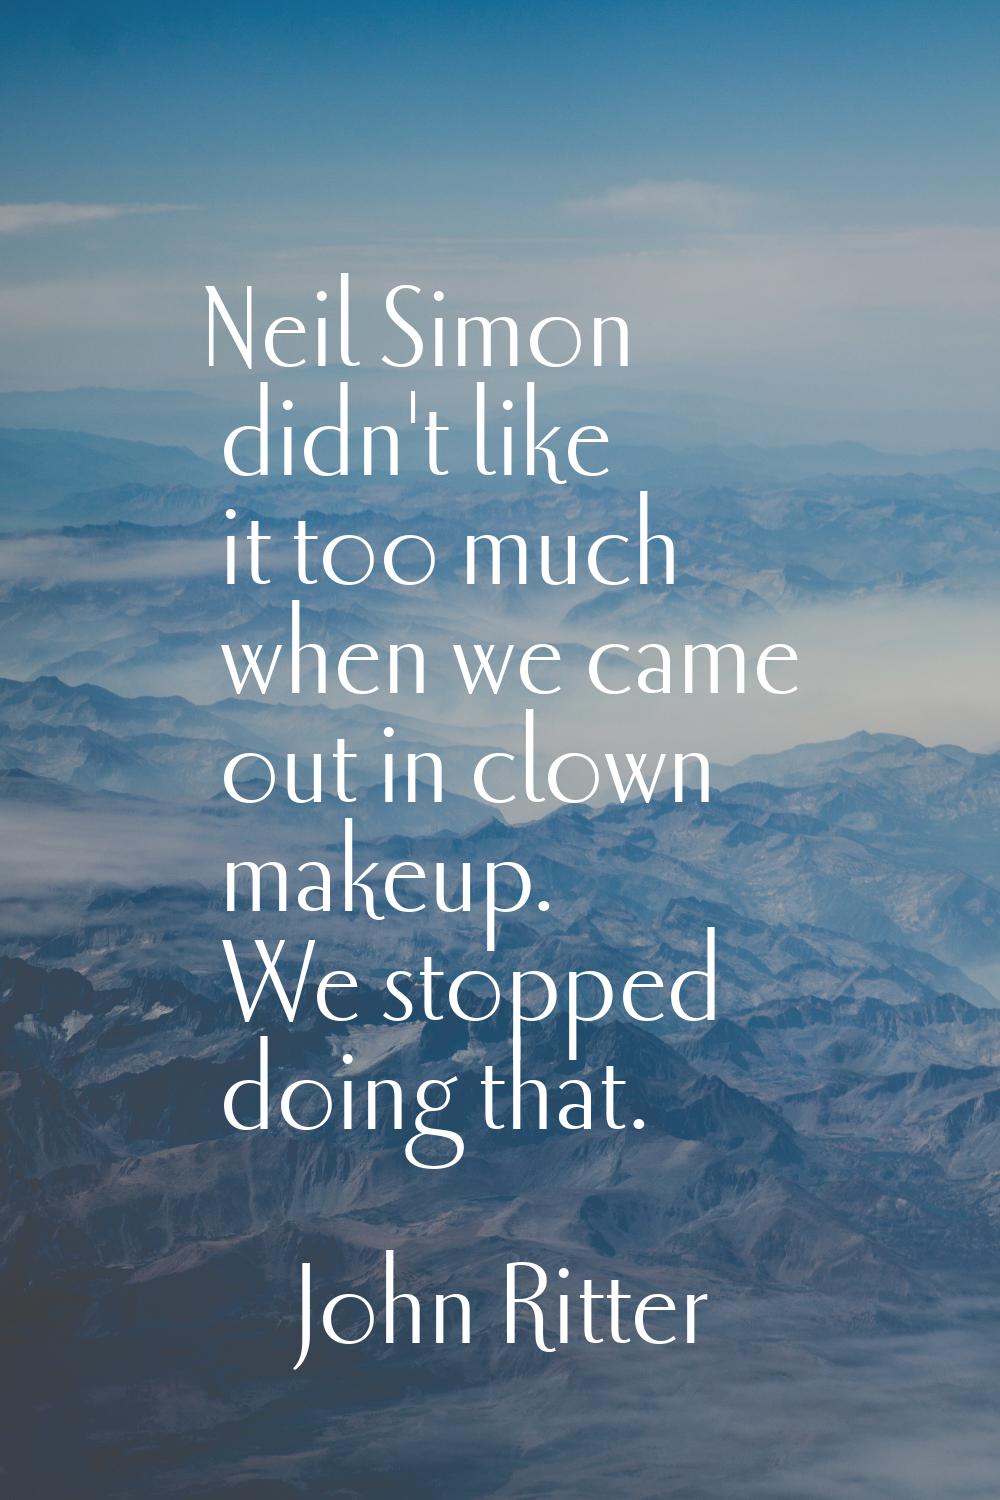 Neil Simon didn't like it too much when we came out in clown makeup. We stopped doing that.